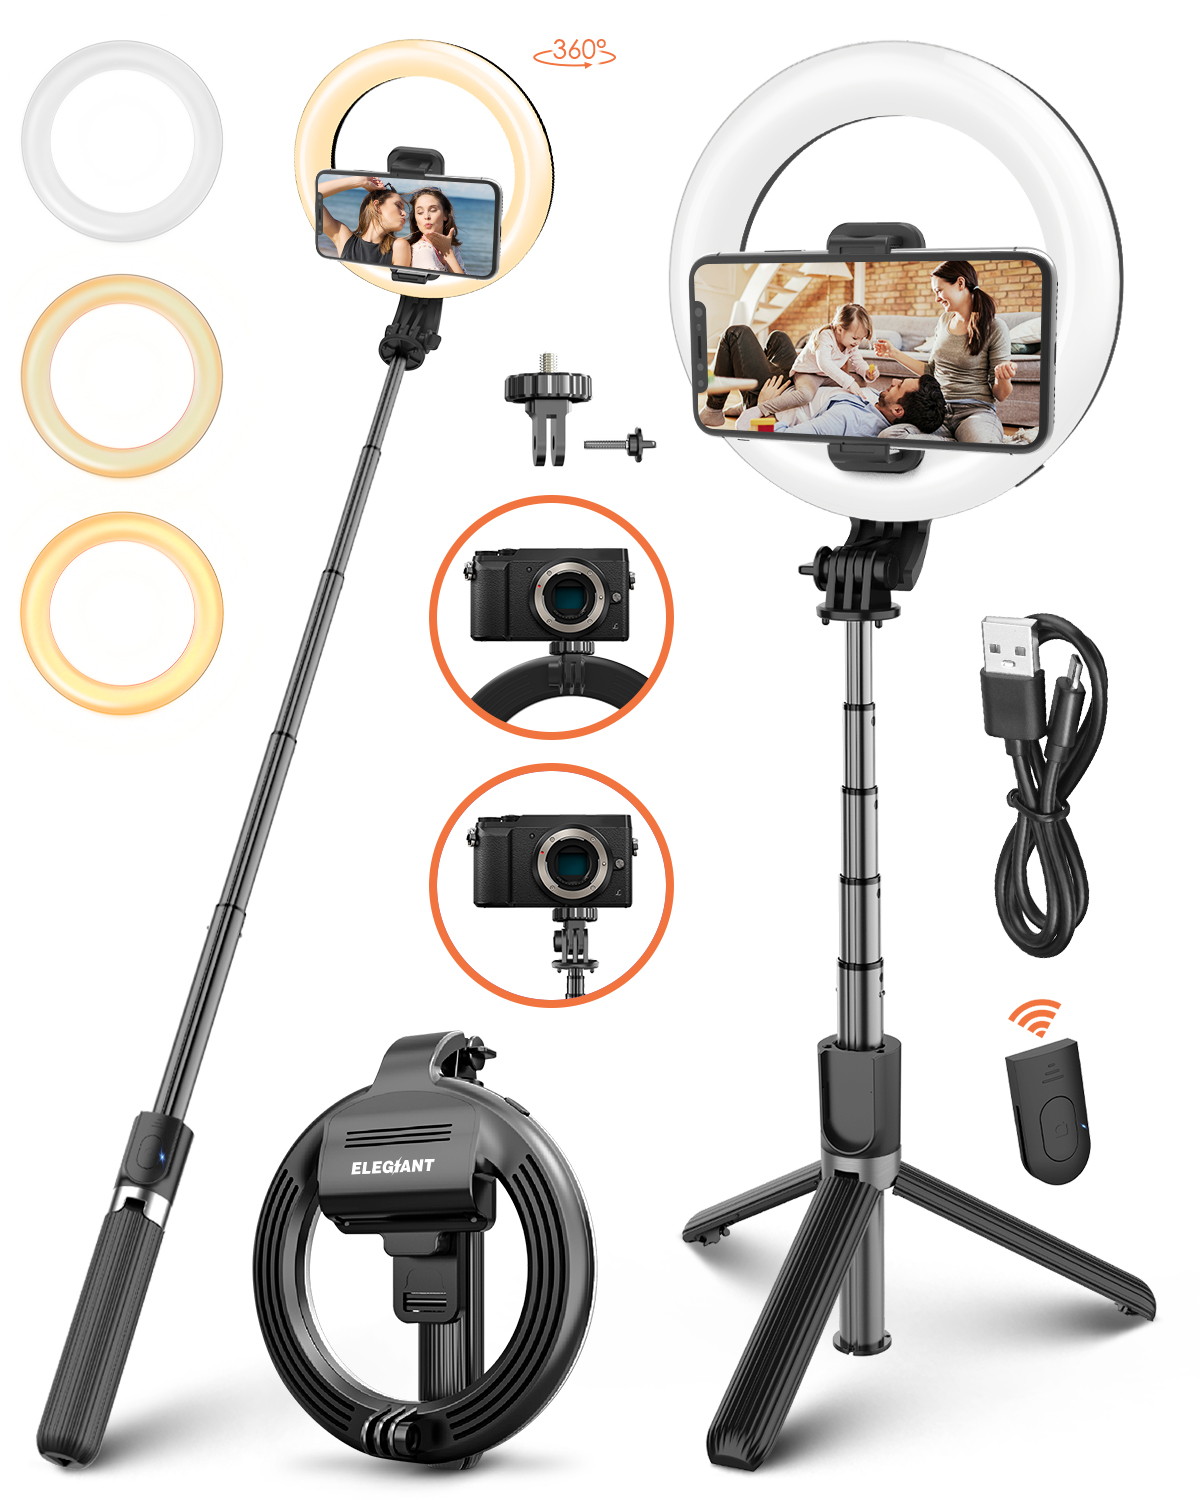 ELEGIANT-EG-09-LED-Ring-Light-Bluetooth-Selfie-Stick-Tripod-with-Remote-Control-Beauty-Fill-Lamp-for-1748938-6